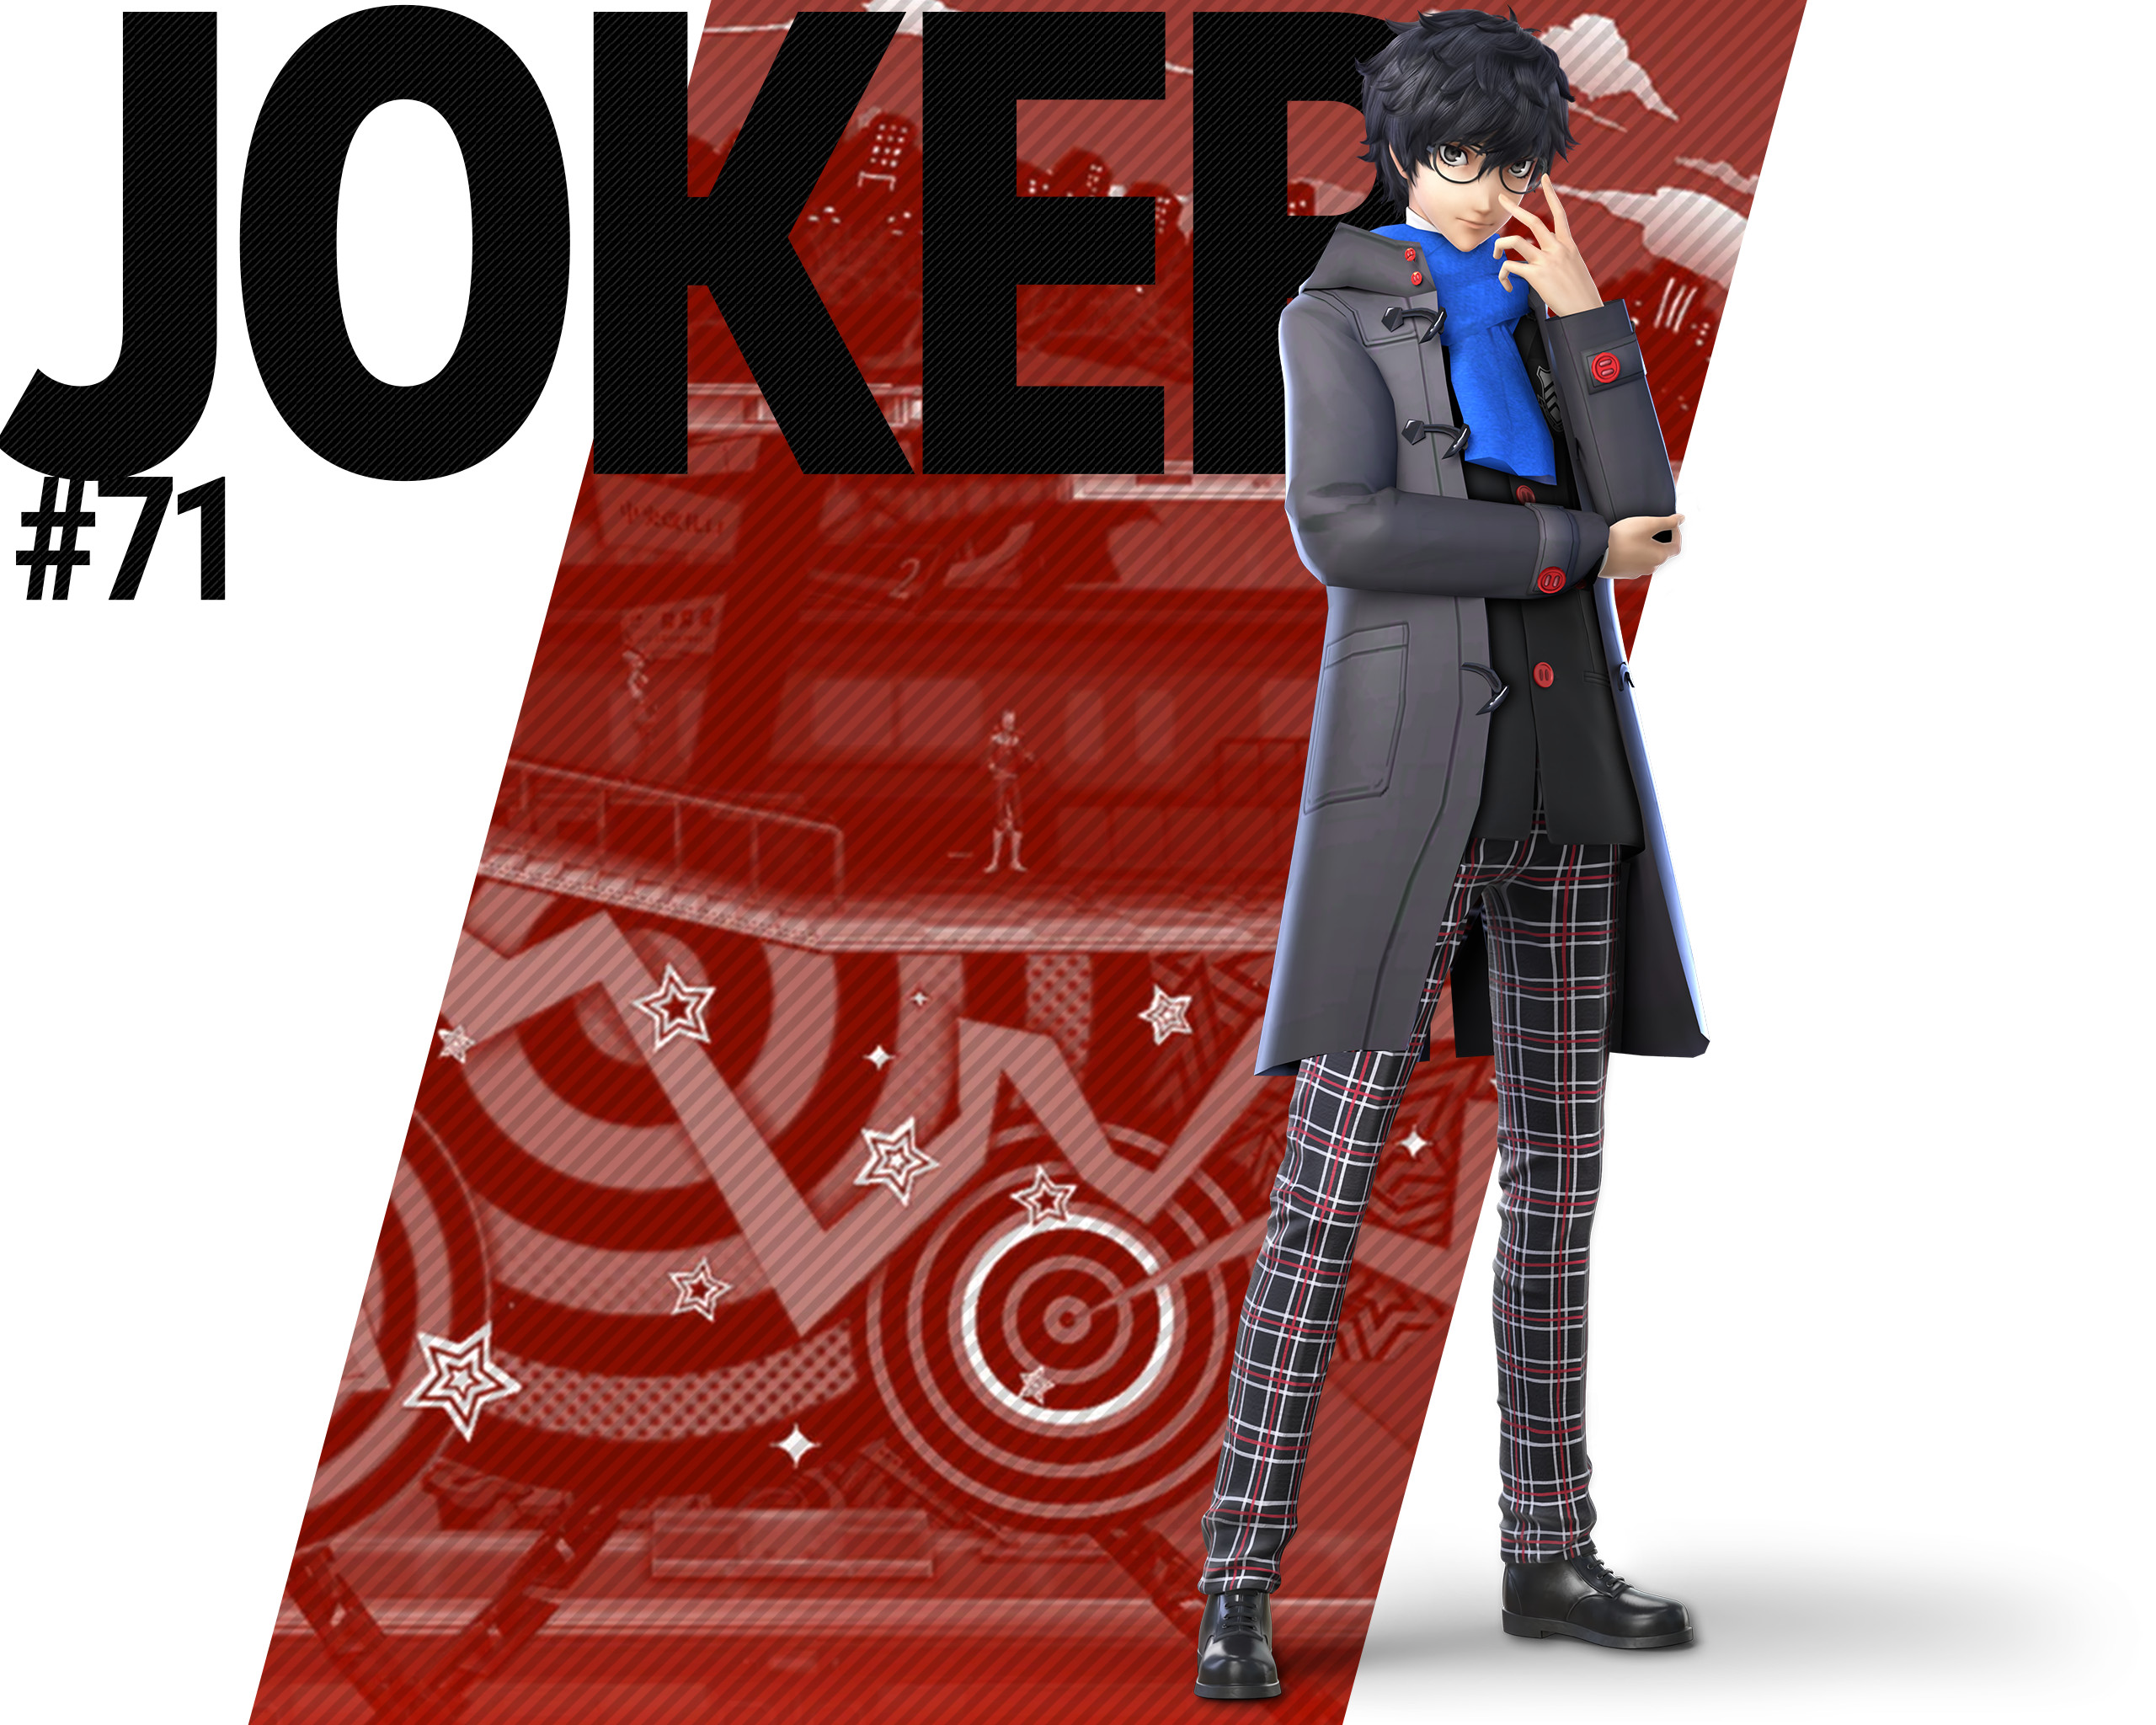 Adds the coat and scarf Joker wears during the 3rd Semester of Persona 5: R...